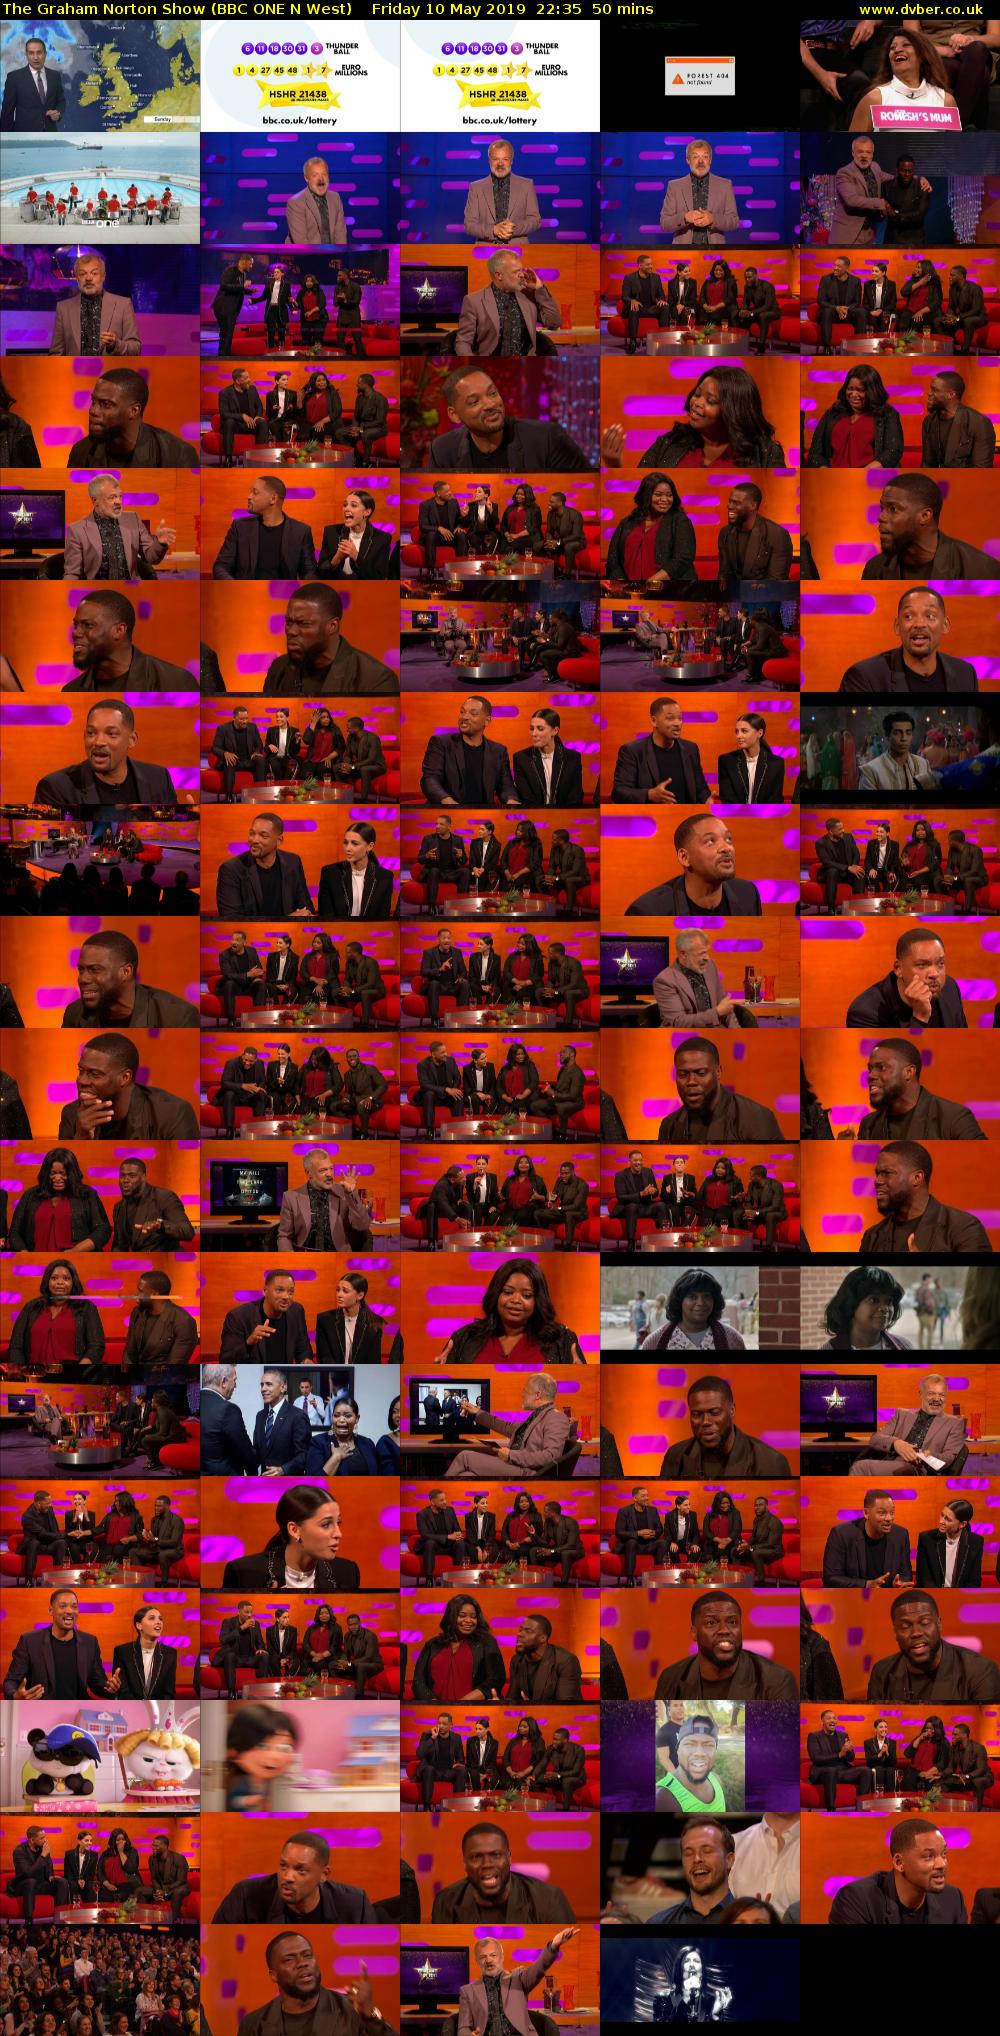 The Graham Norton Show (BBC ONE N West) Friday 10 May 2019 22:35 - 23:25